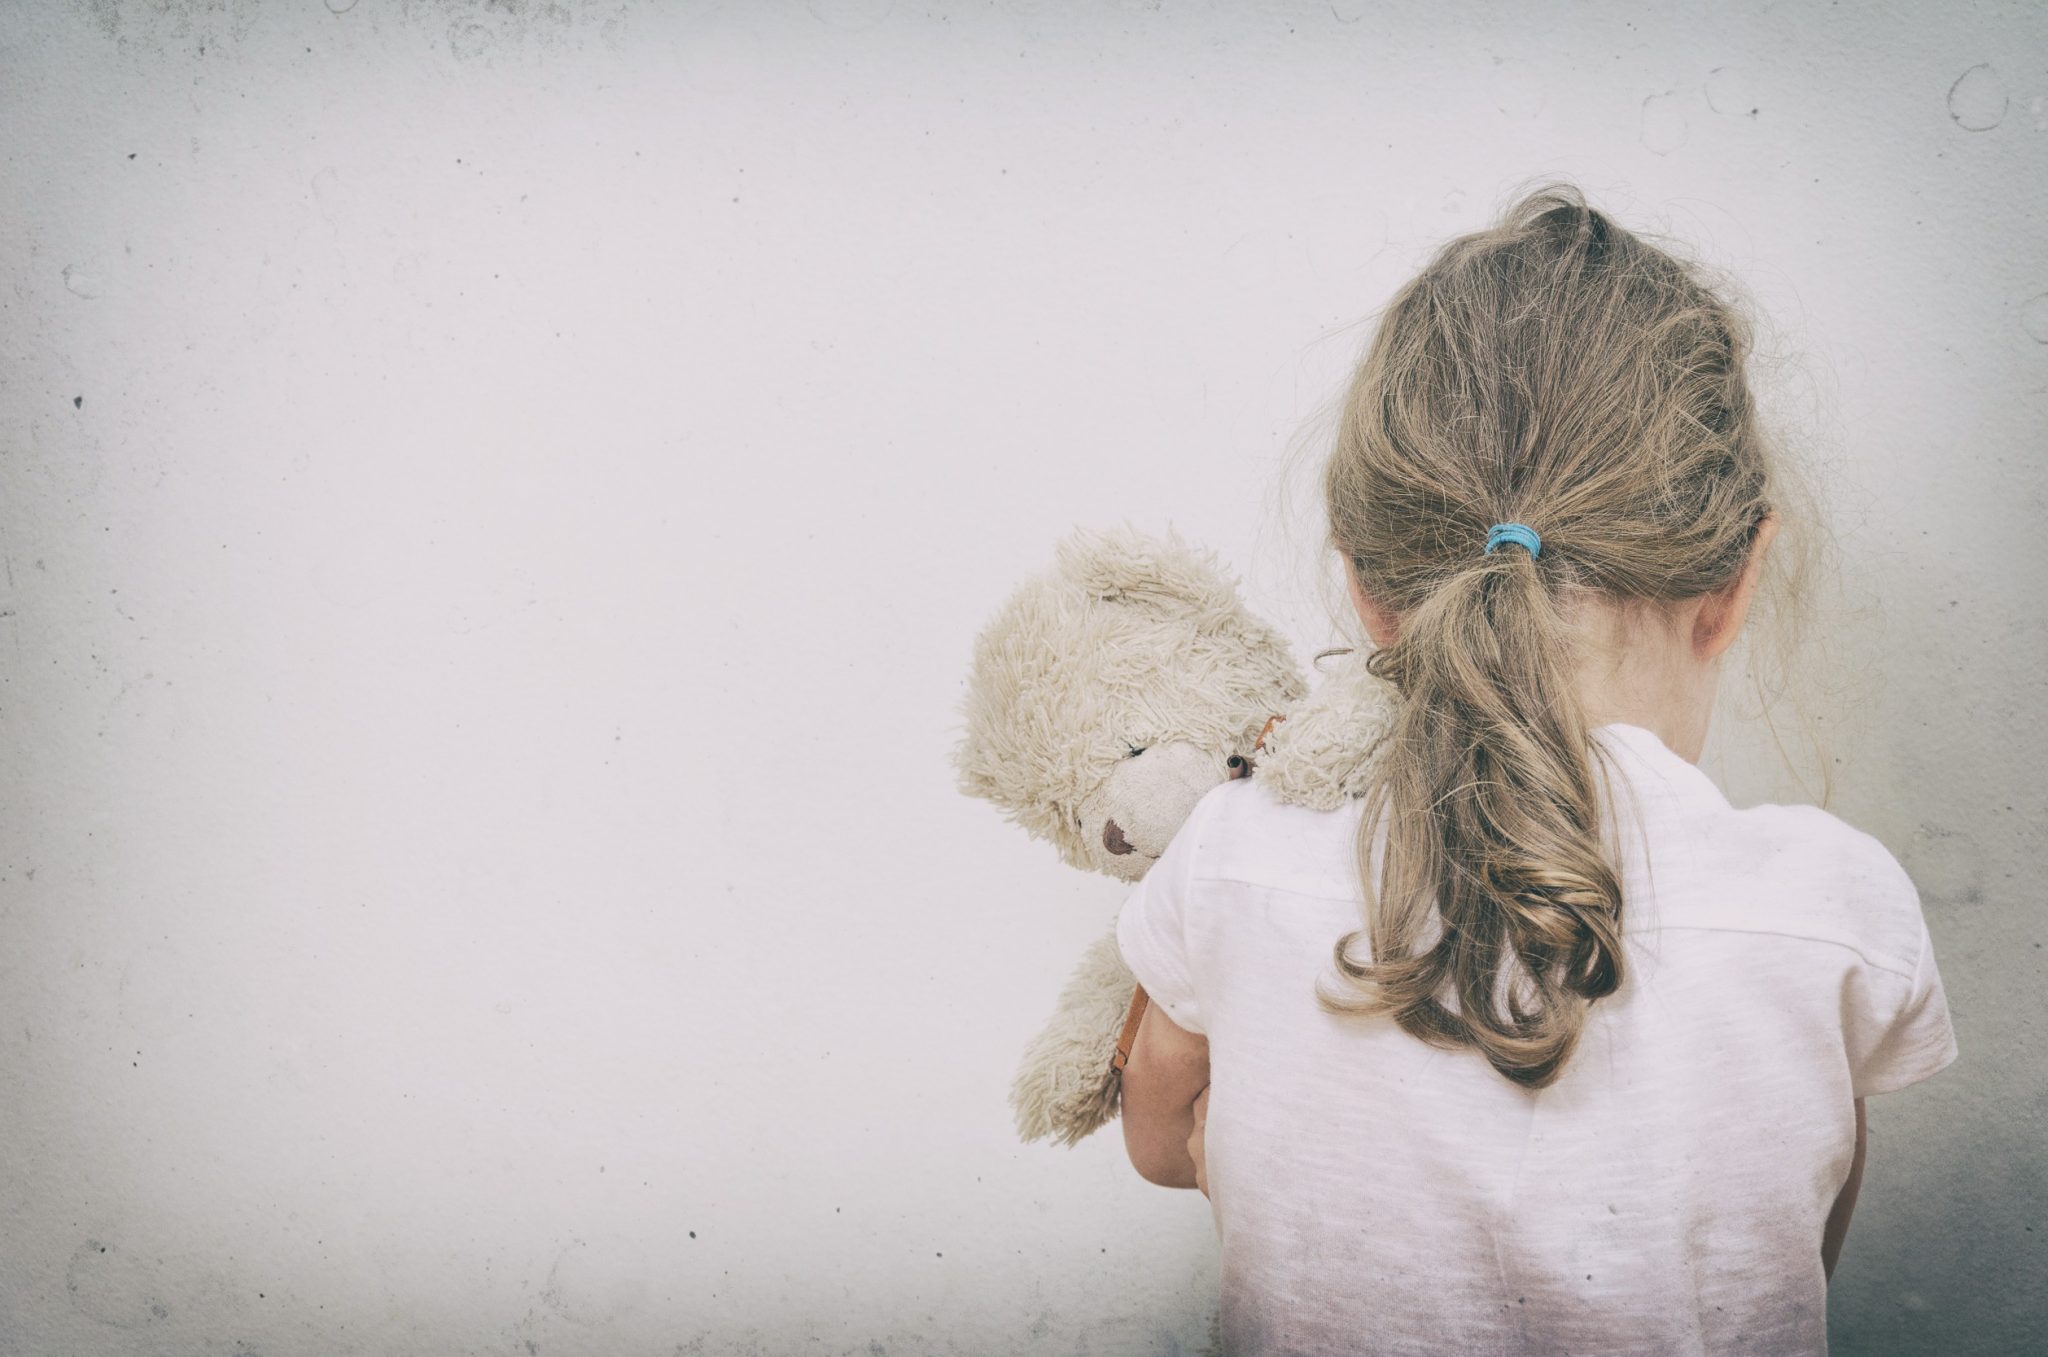 Child Sexual Abuse Victim Facing Away With Teddy Bear. 